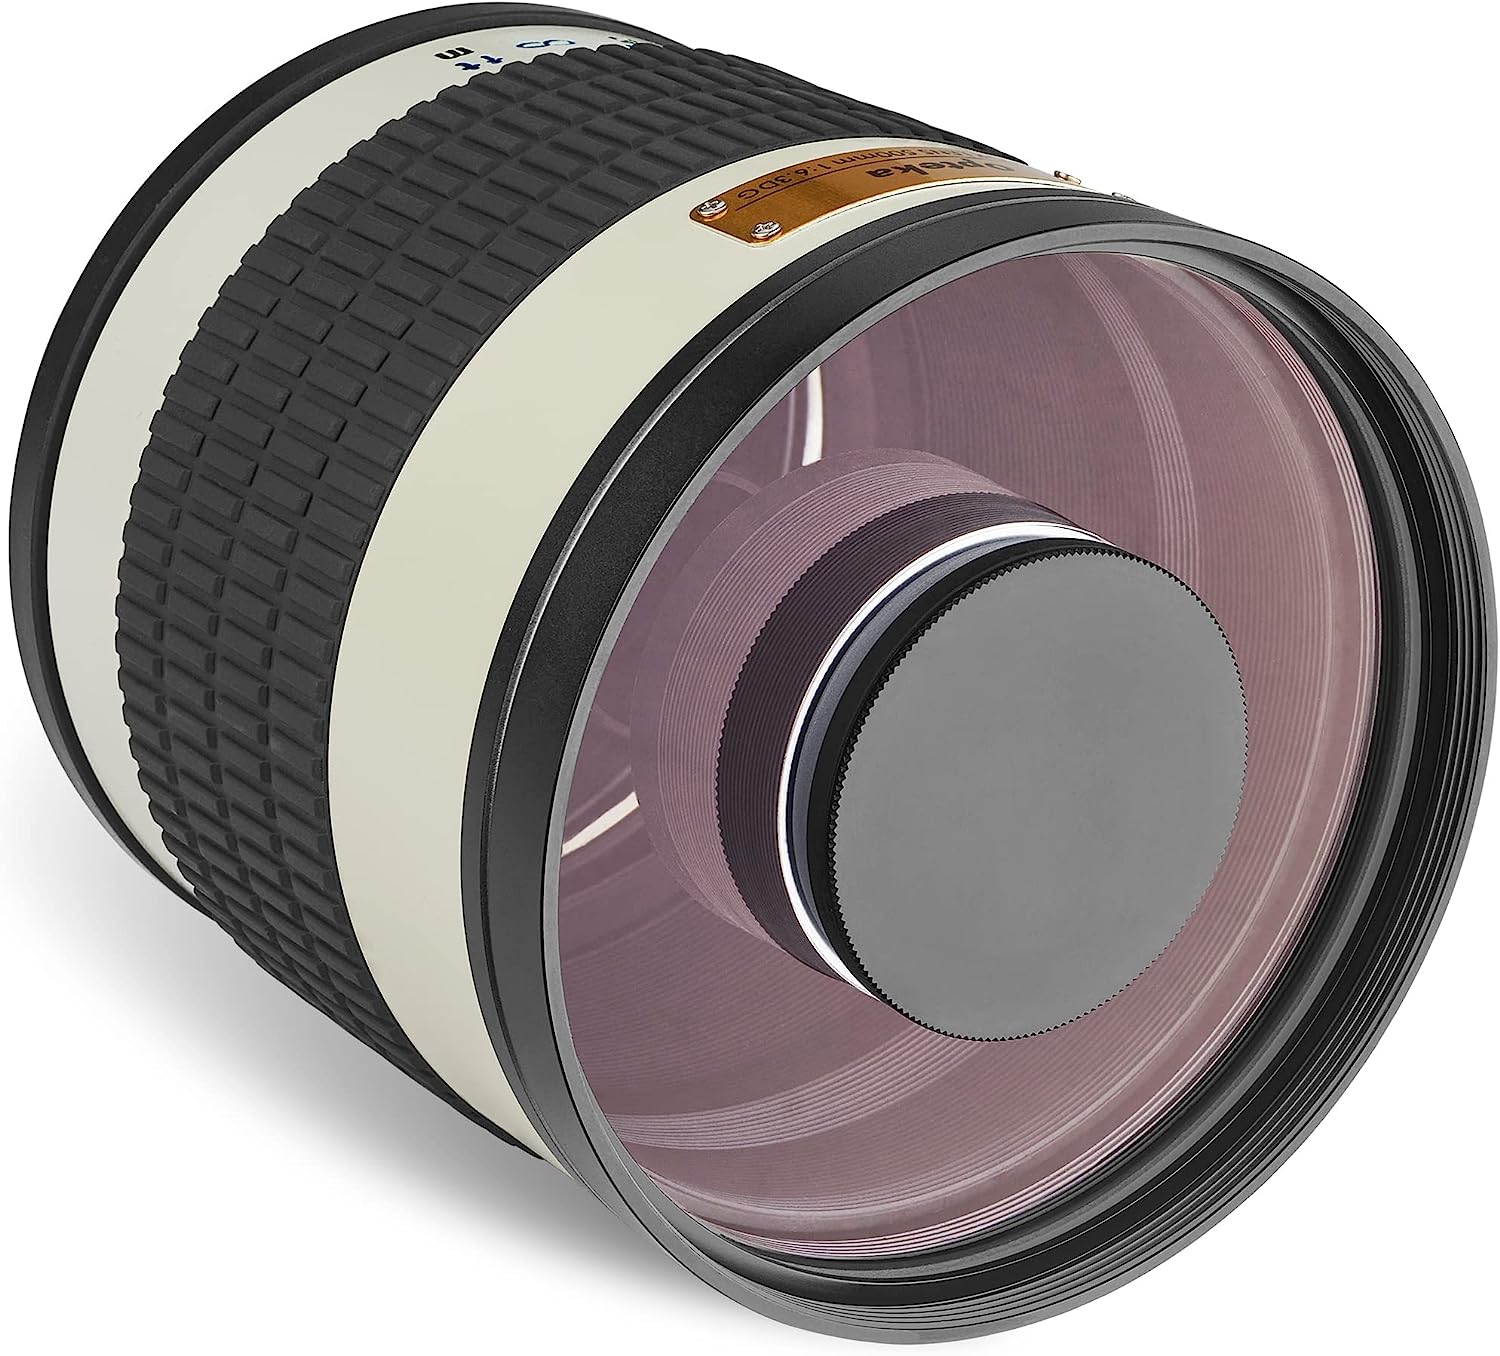 Opteka 500mm f/6.3 Mirror Lens for T Mount